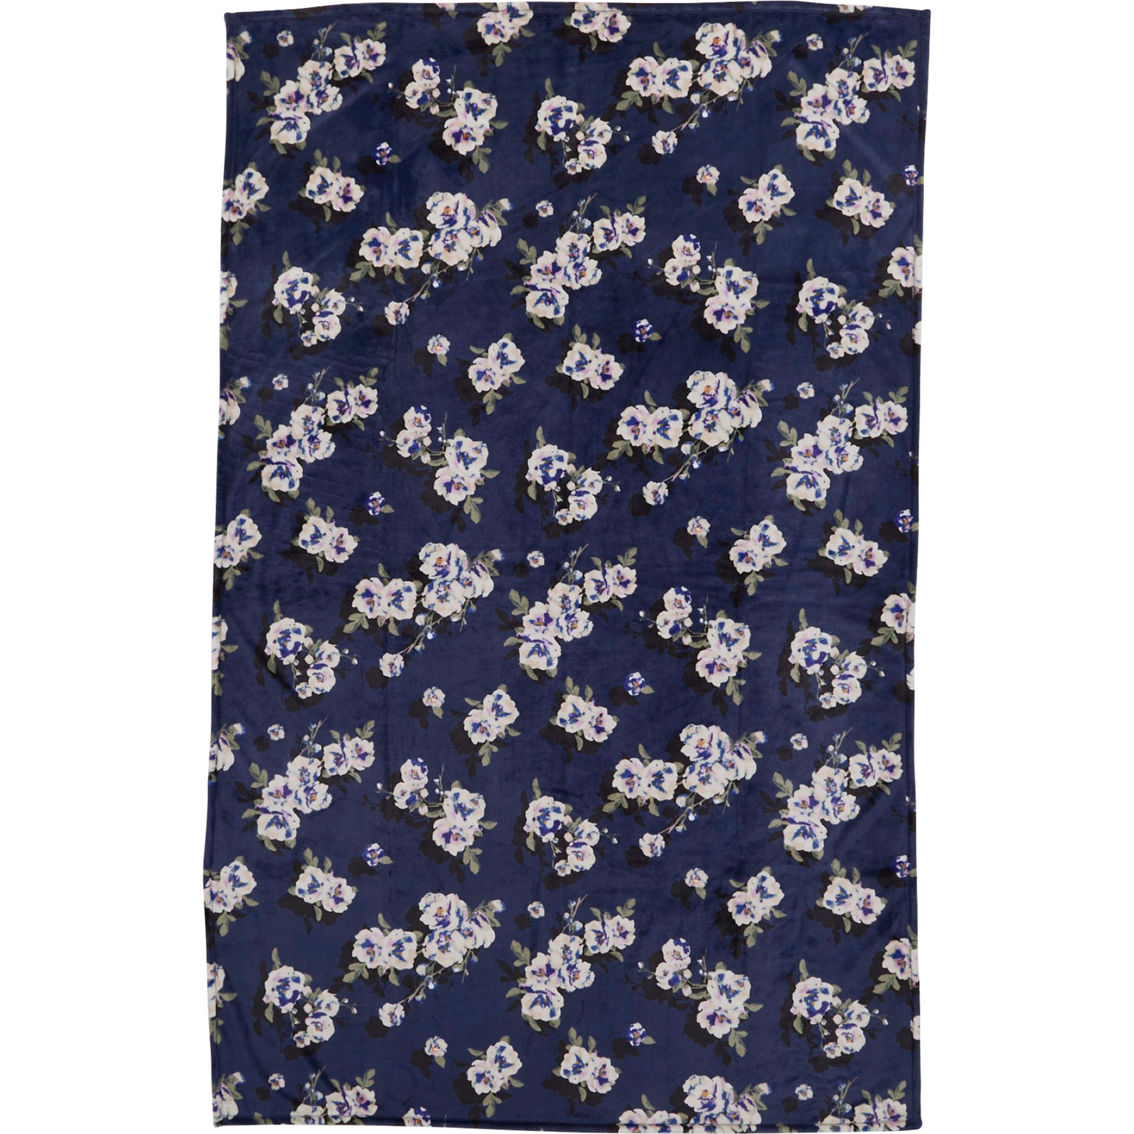 Vera Bradley Plush Throw Blanket, Blooms And Branches Navy | Blankets ...